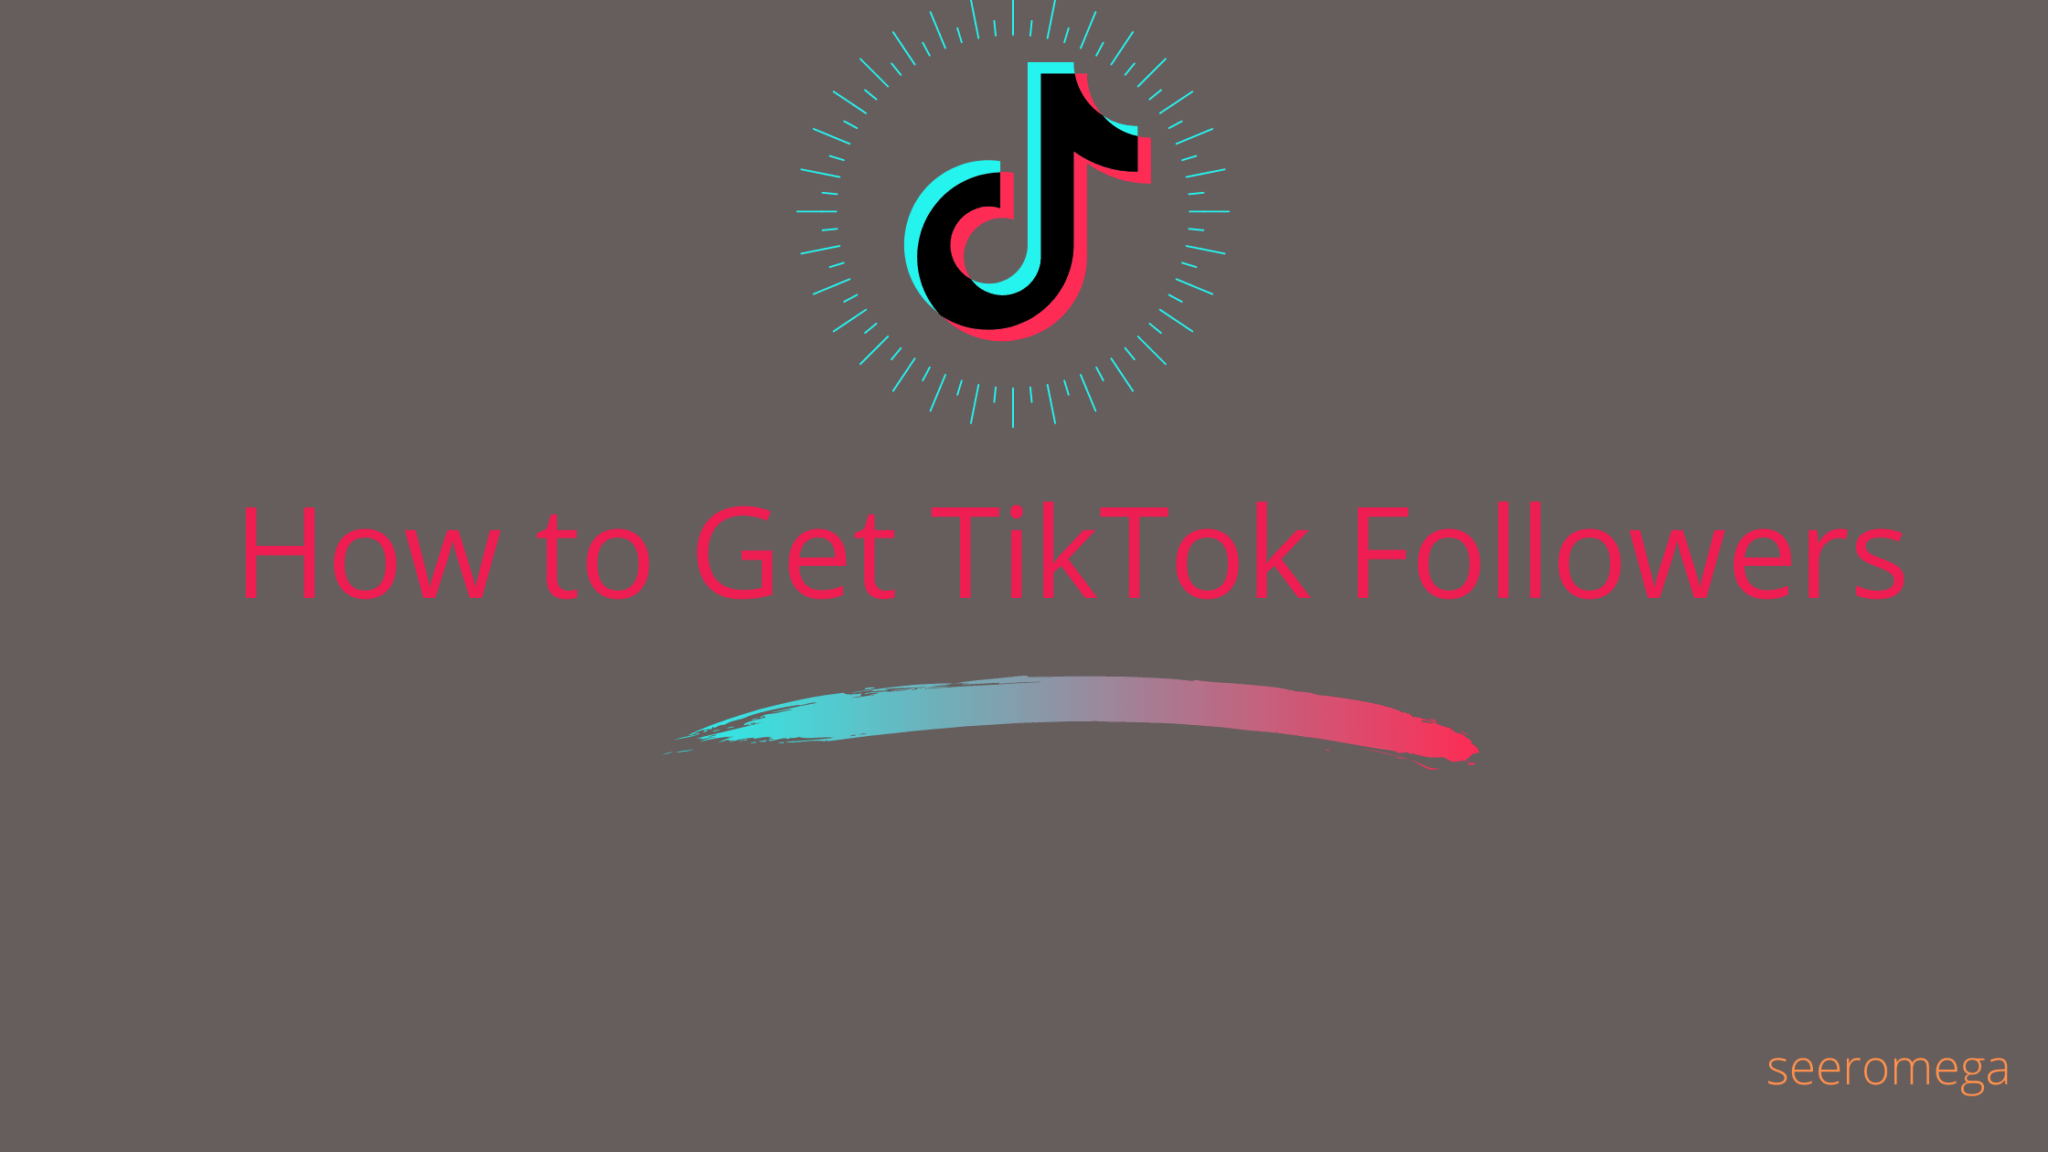 How to Get Free TikTok Followers - A Complete Guide - Seeromega